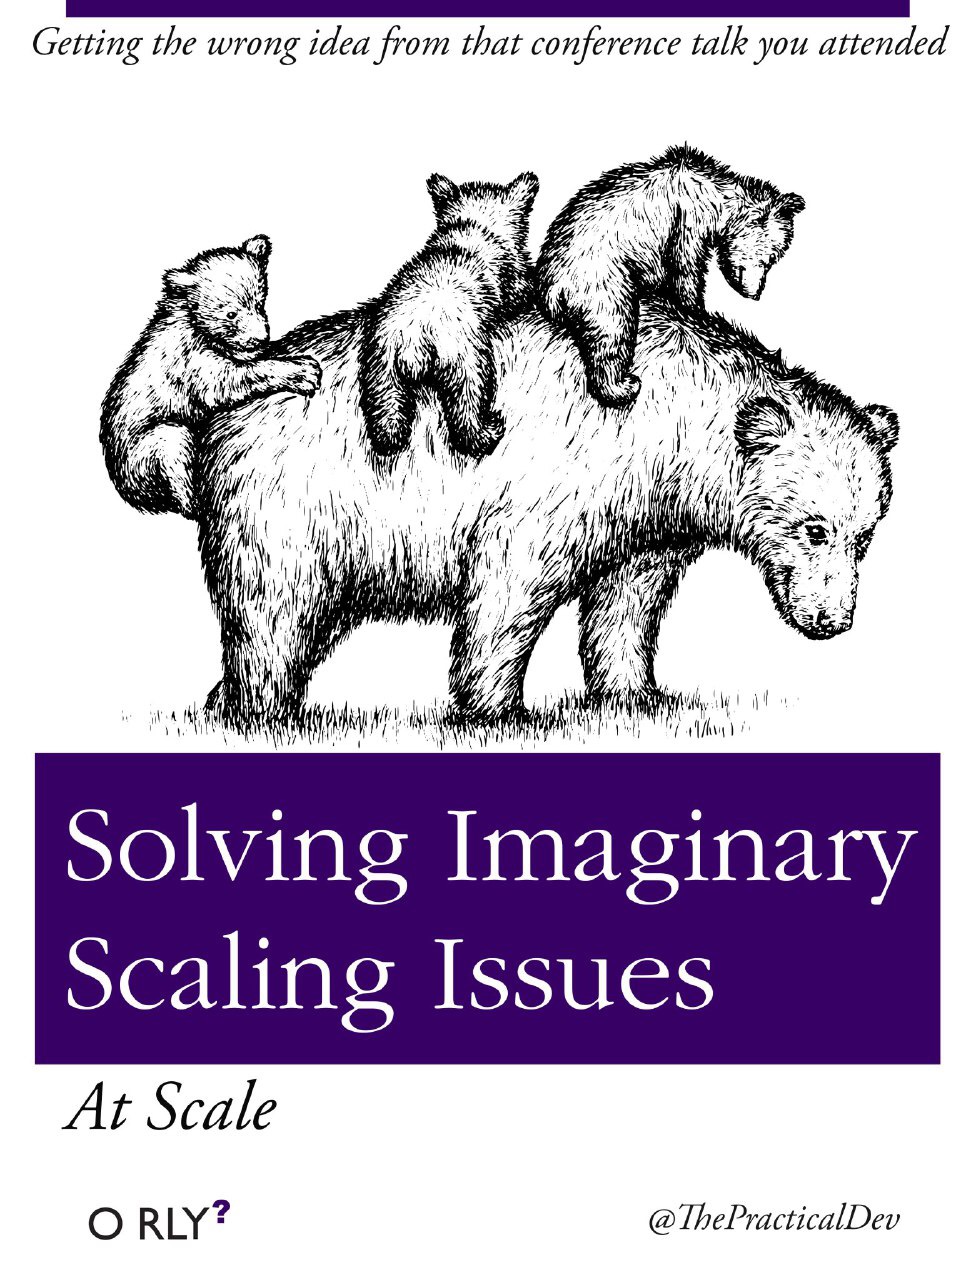 Solving Imaginary Scaling Issues At Scale book cover